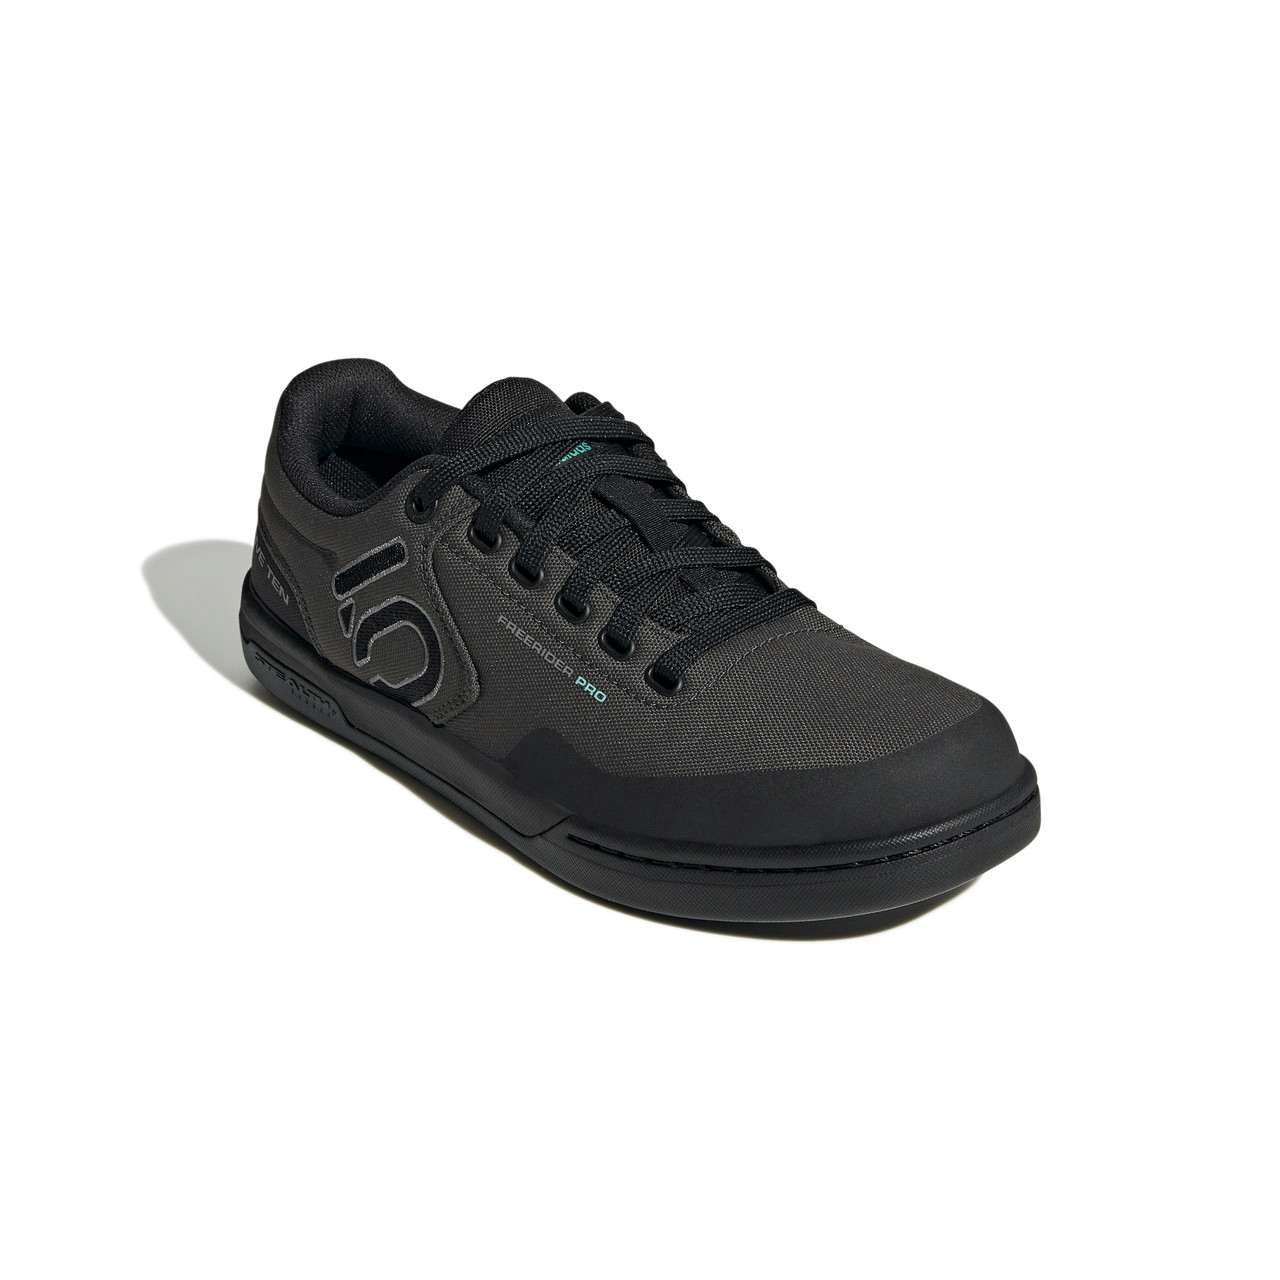 Freerider Pro Canvas Cycling Shoes DGH Solid Grey/Core Black